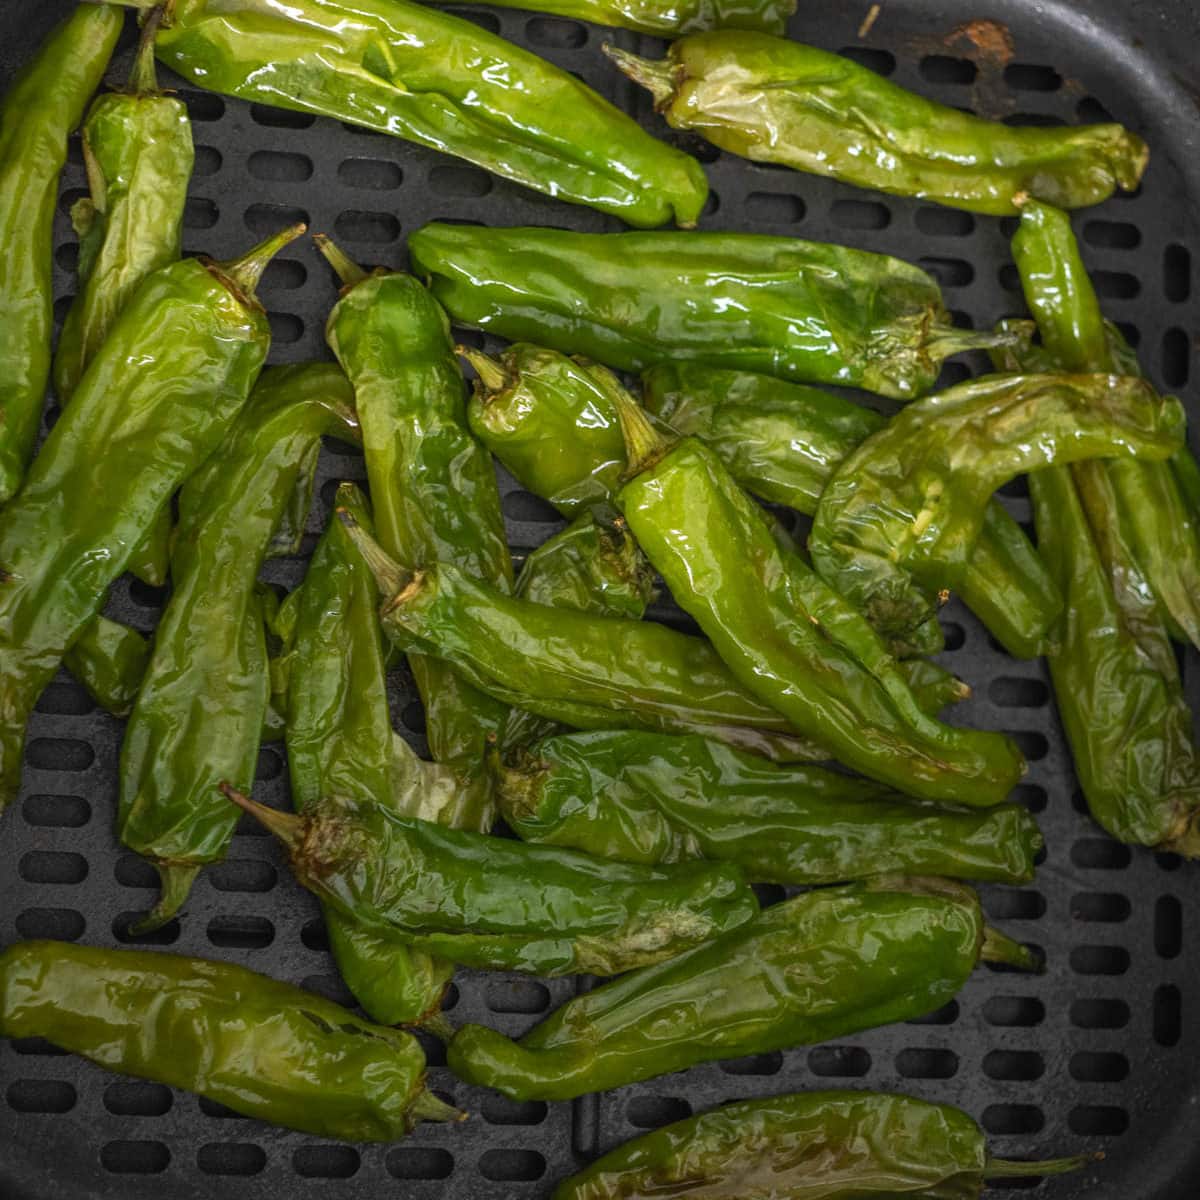 Plate of air fryer shishito peppers in front of air fryer.